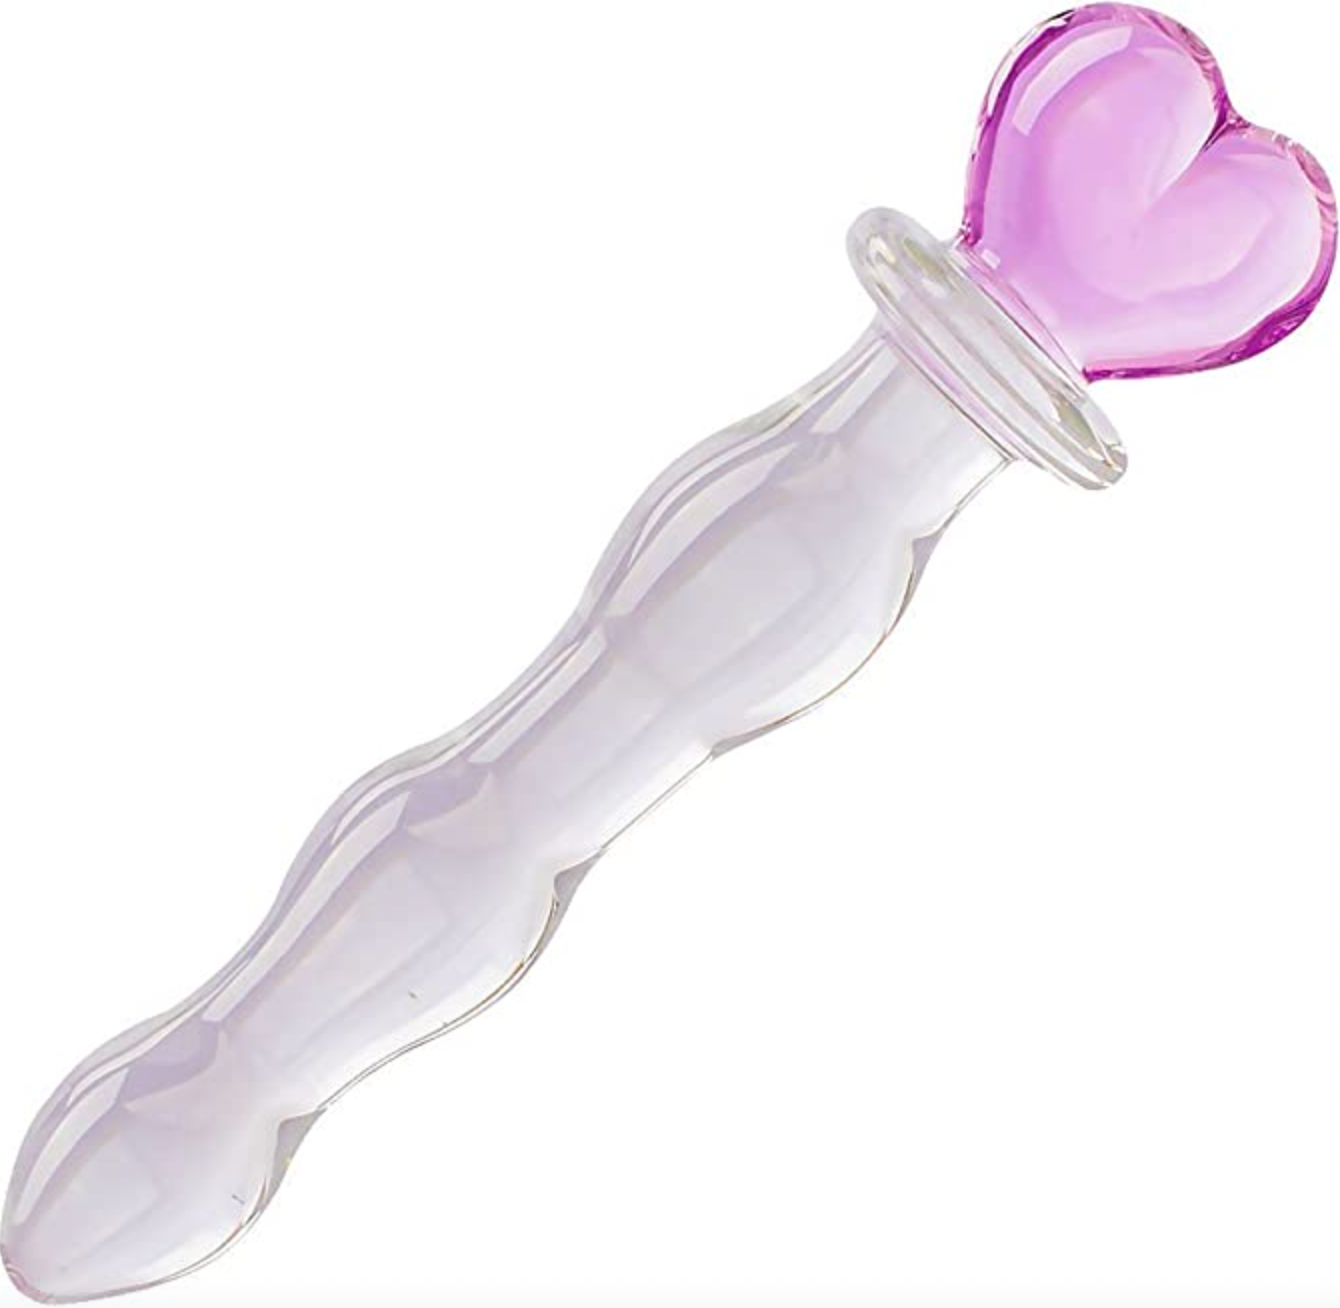 Sex Toy Play